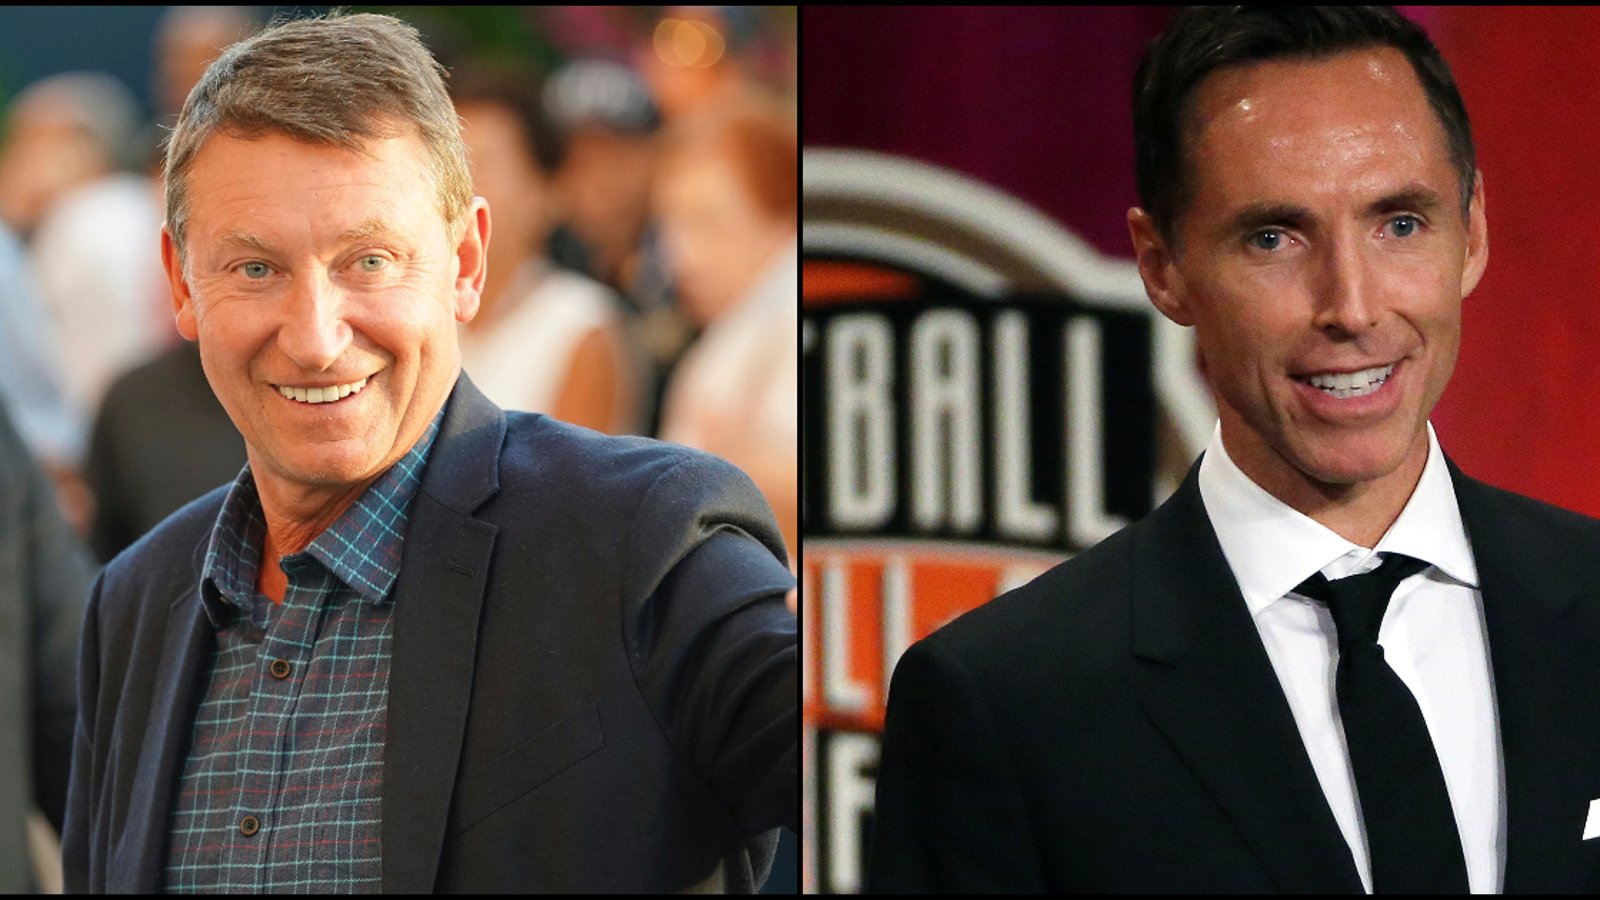 Canadian icons Wayne Gretzky and Steve Nash have just bought their own sports team.